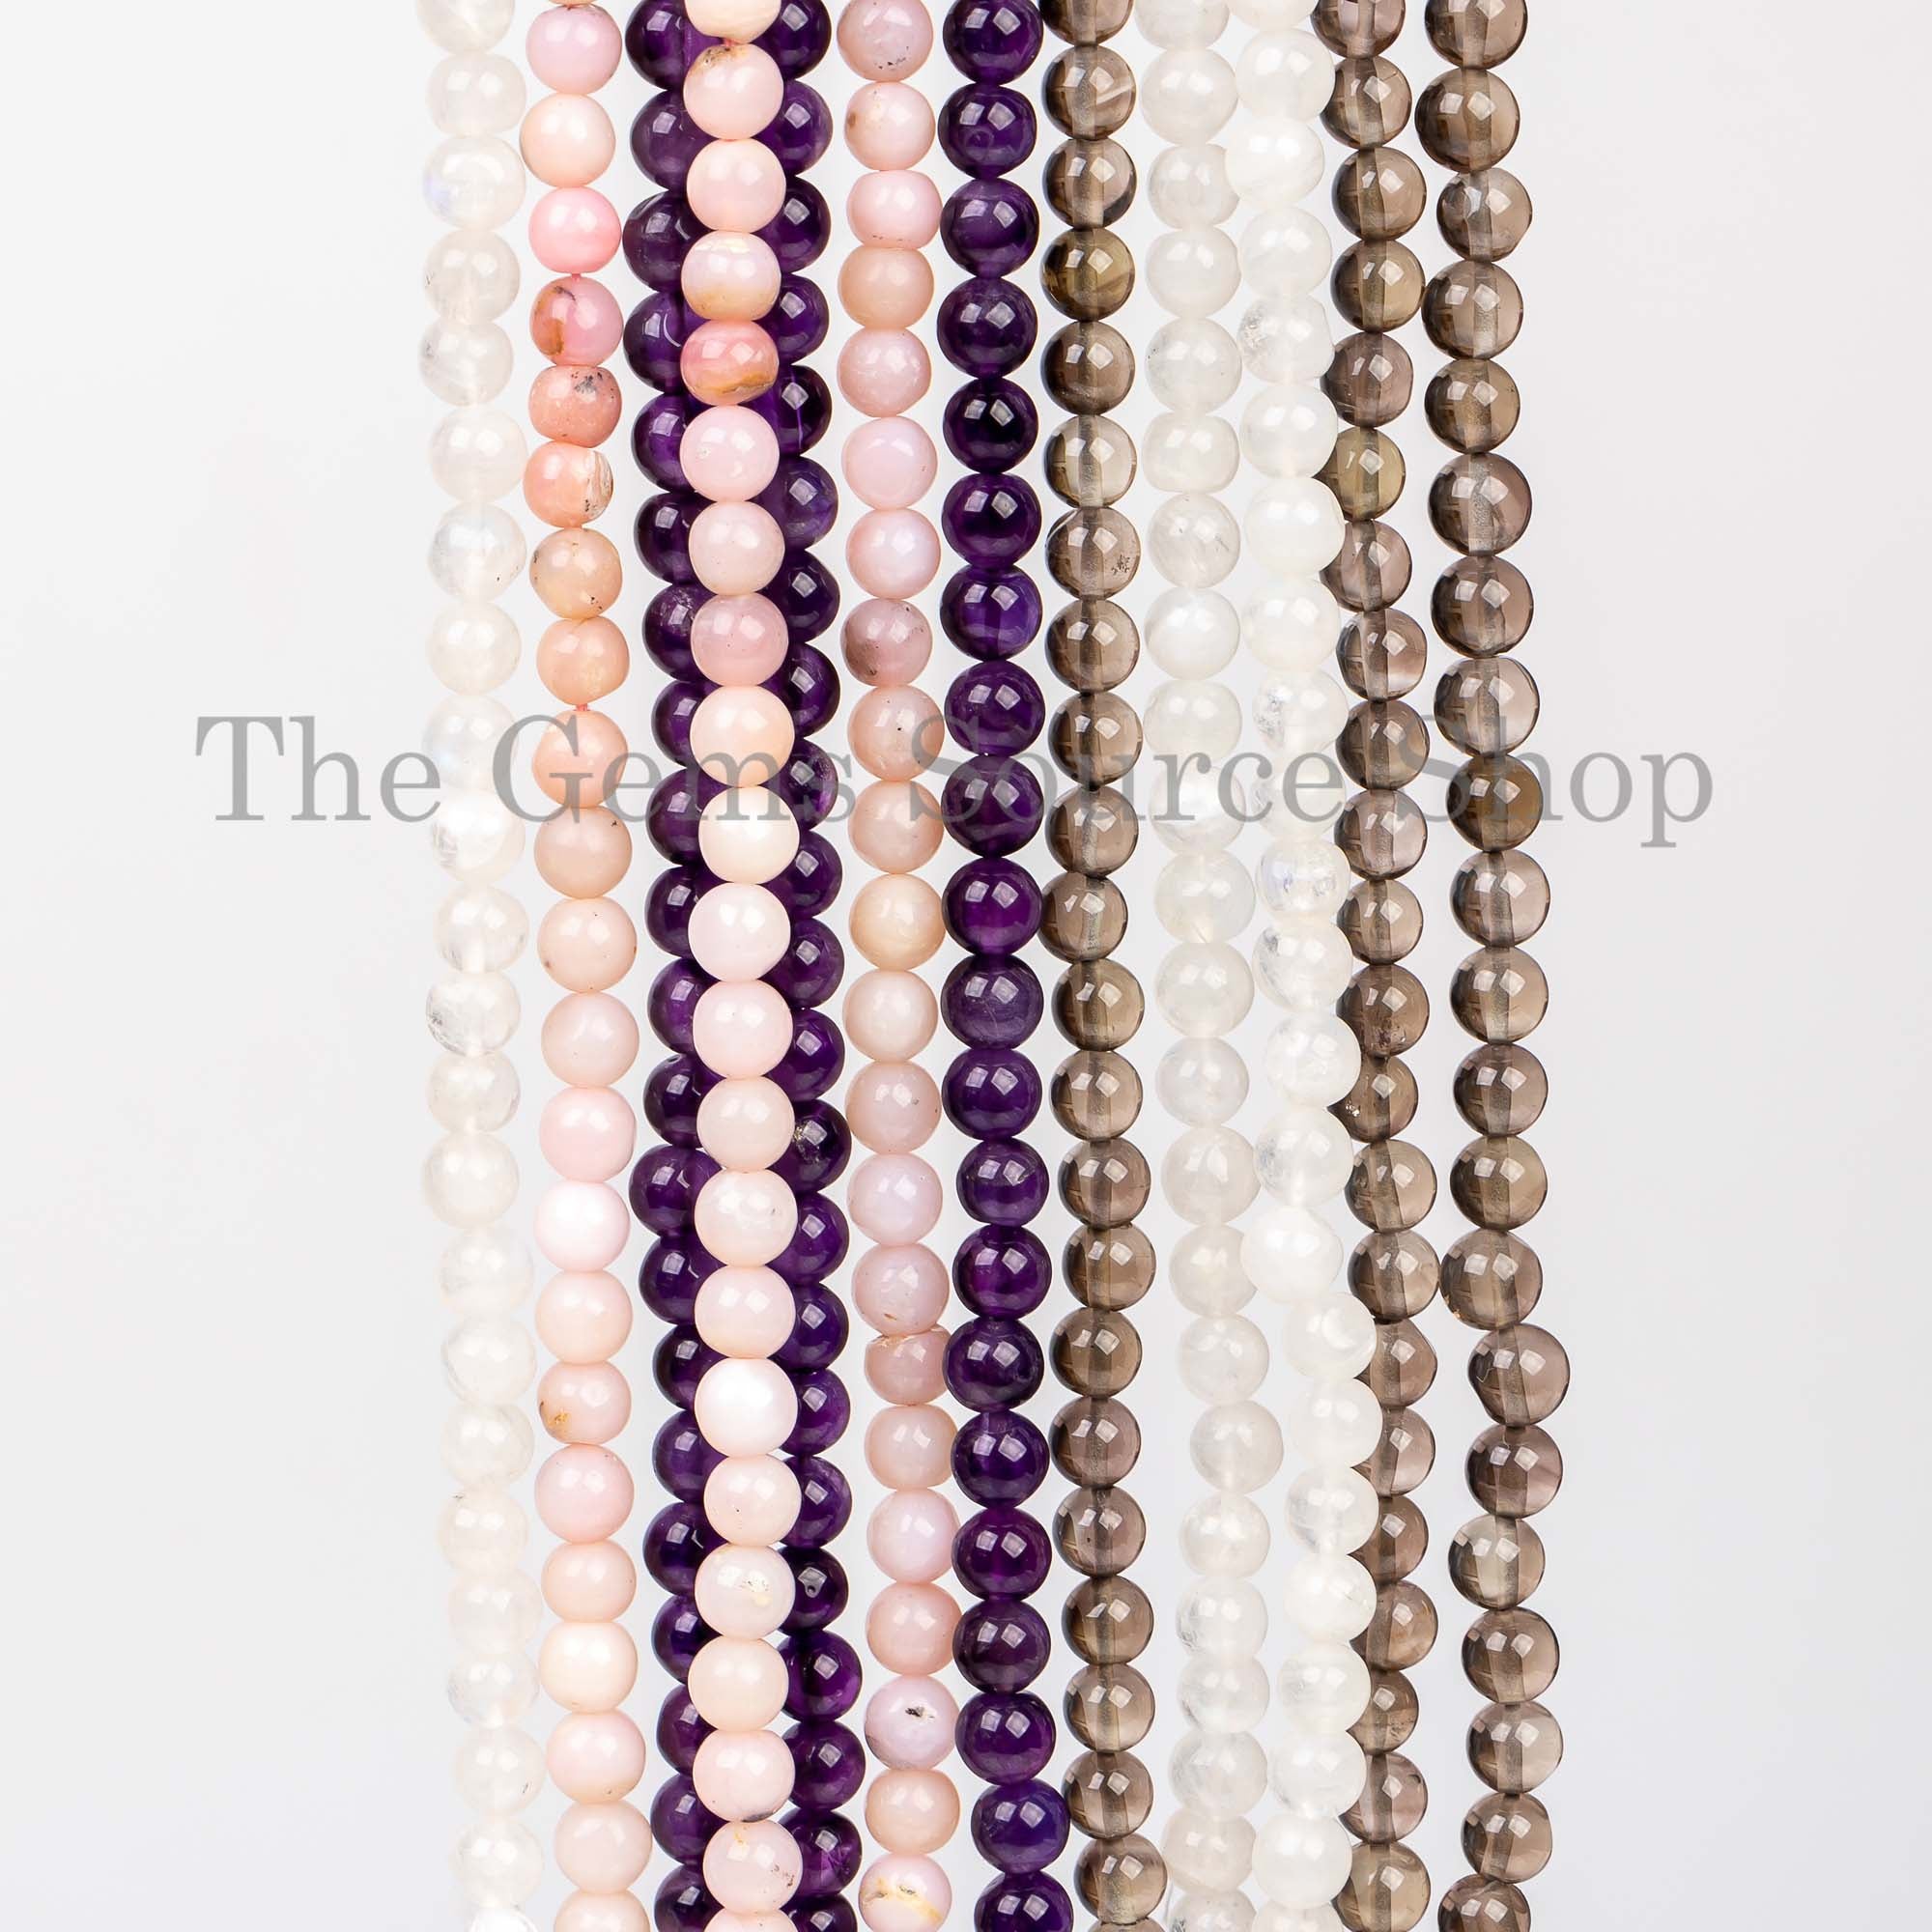 86 Strands, Wholesale Lot, Multi Stone Beads, 6-7mm Smooth Round Beads, Mix Stone Beads, Closeout Deal, Gemstone Beads For Jewelry